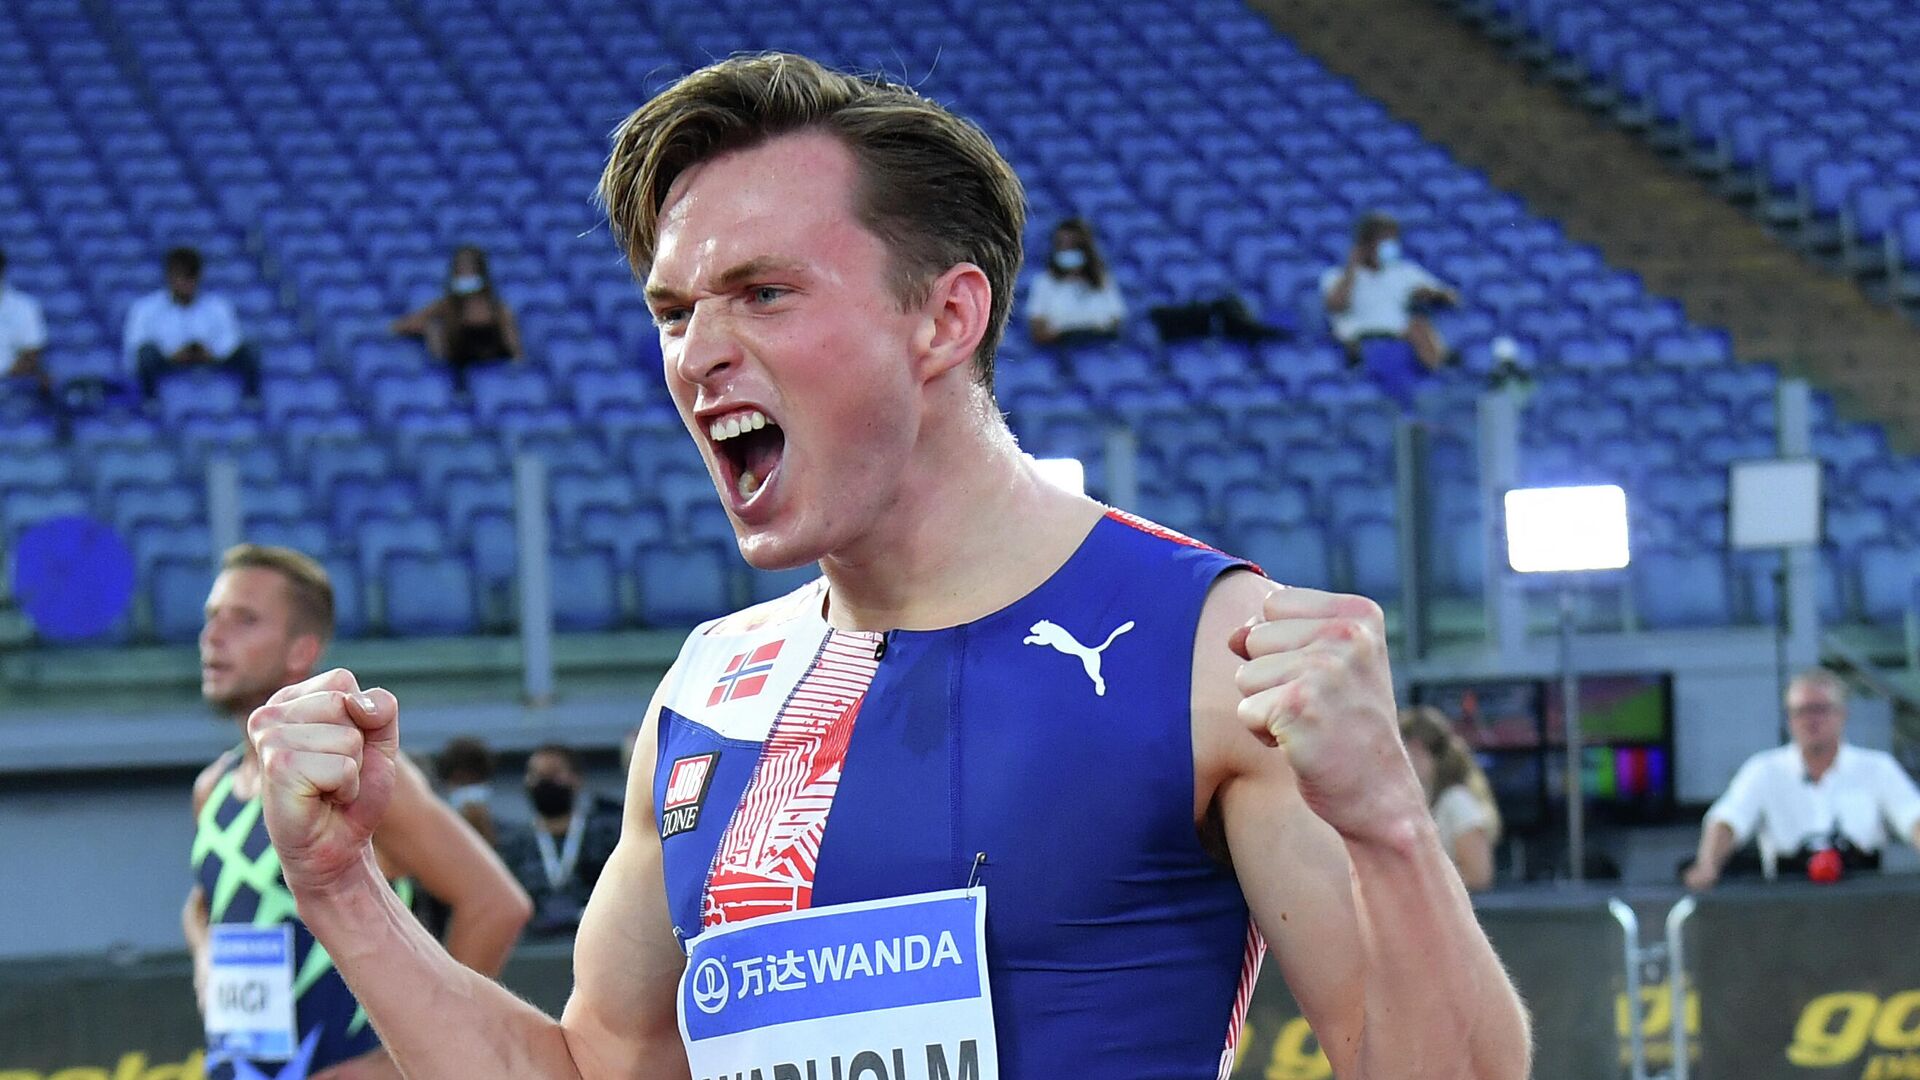 Norway's Karsten Warholm celebrates after wins in the men's 400mt Hurdles final during the IAAF Diamond League competition on September 17, 2020 at the Olympic stadium in Rome. (Photo by Andreas SOLARO / AFP) - РИА Новости, 1920, 01.07.2021